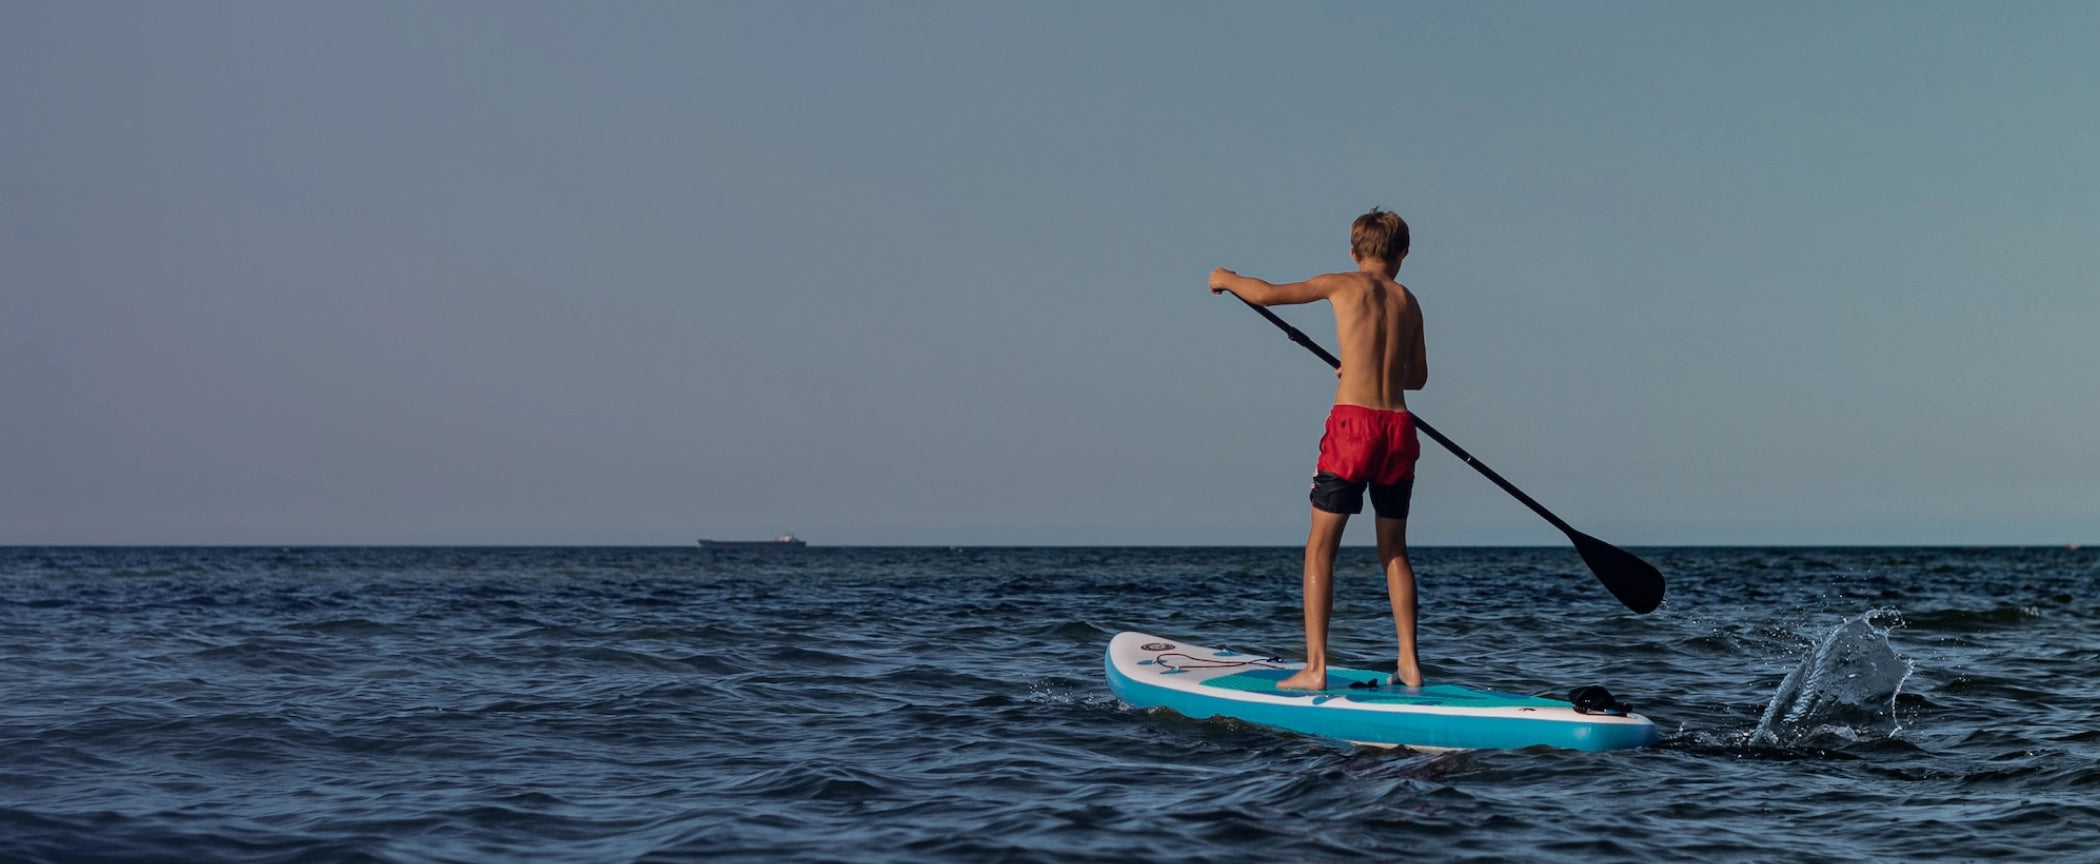 Junge auf Stand up Paddle Board